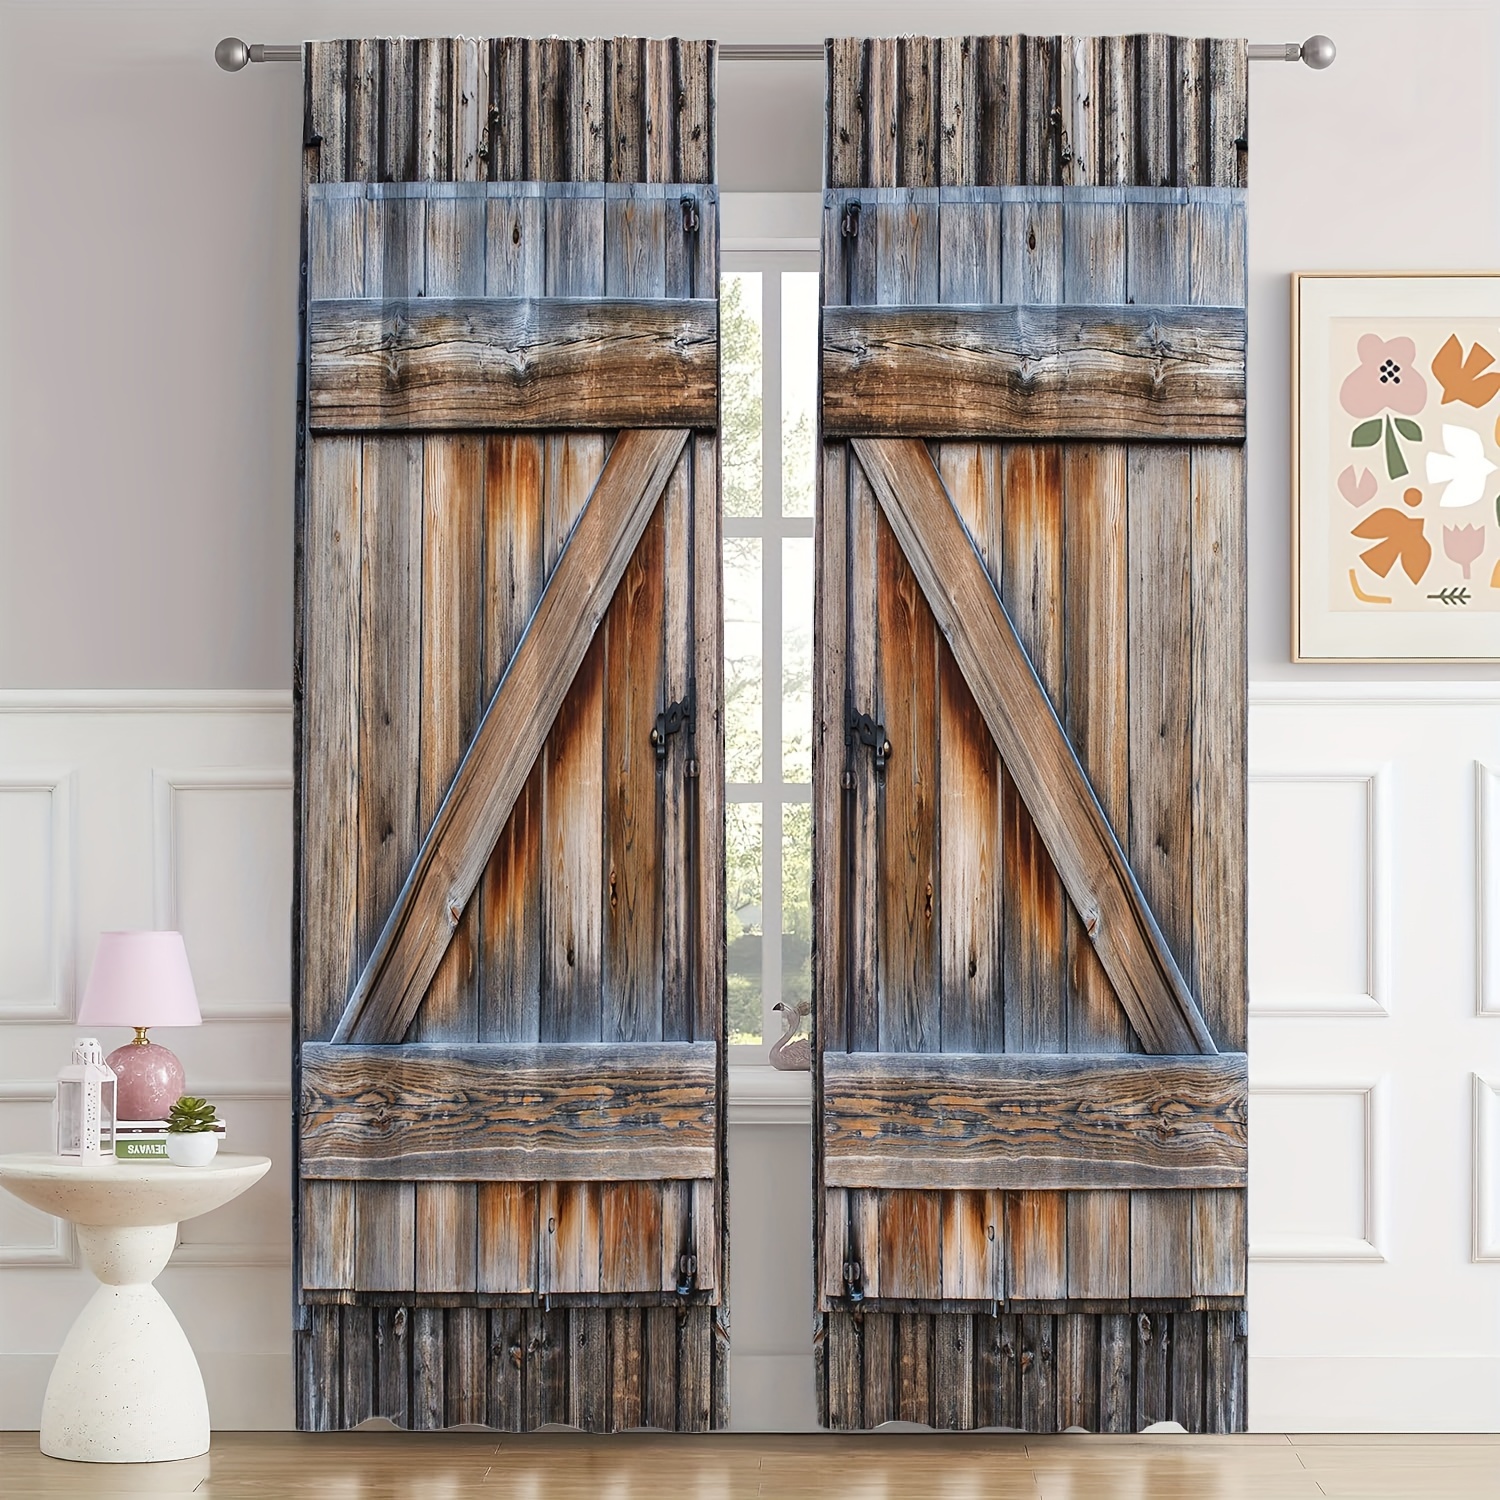 

Door Print Curtain Set, 2 Piece - Jacquard Weave Polyester Drapes With Tie Back, Machine Washable, Artistic Doorway Curtain For Living Room - Rustic Farmhouse Decor